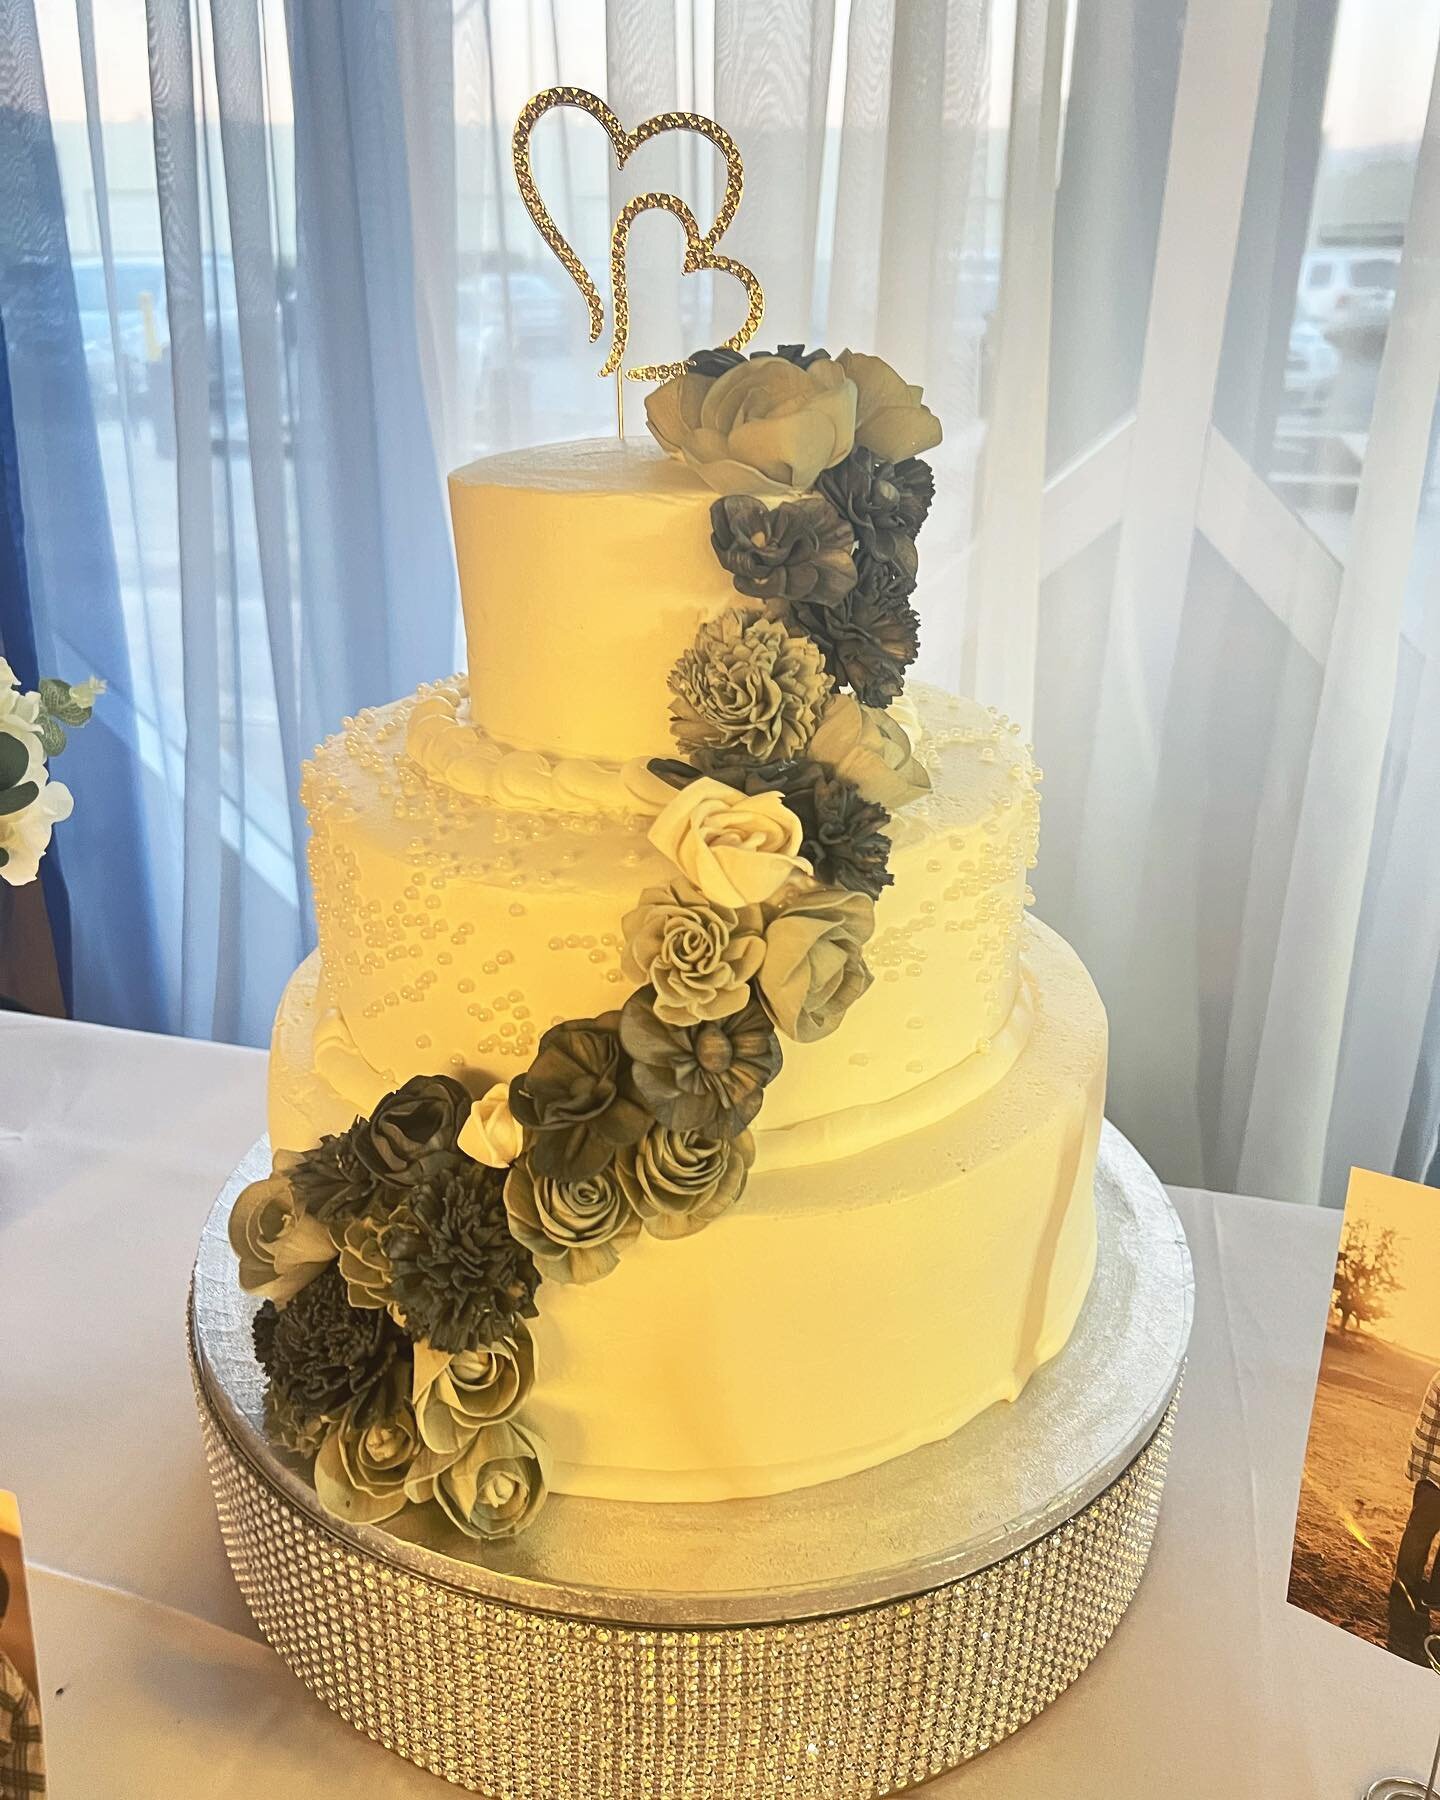 Sometimes we double as a cake decorator 😁 Our sweet bride provided wooden flowers and a simple cake. Within minutes ~ magic was created. Reason #466 to hire a planner 😉
♡
♡
♡
Congratulations, Jessica &amp; Clemente! @jessicadenise94 #magnificentcou